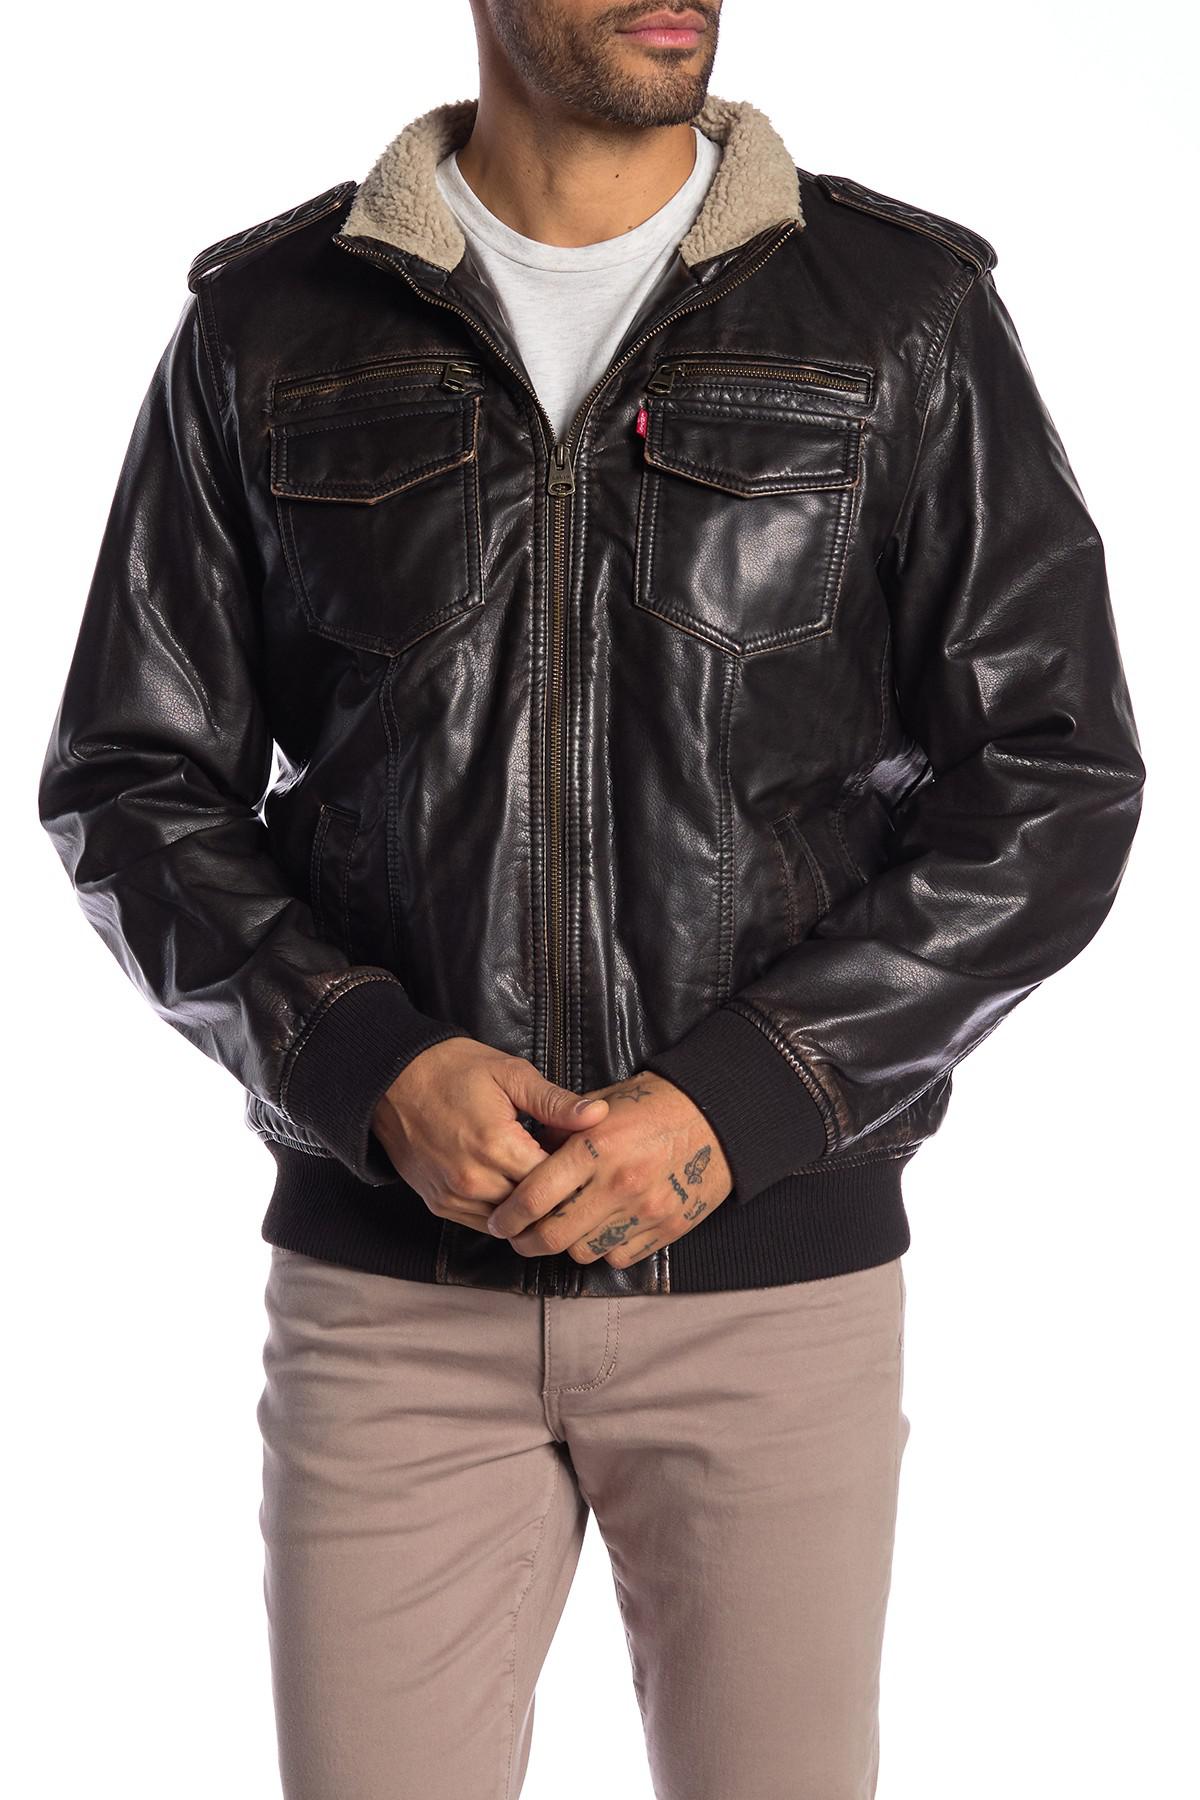 Levi's Big And Tall Faux Leather Sherpa Lined Aviator Bomber Jacket in